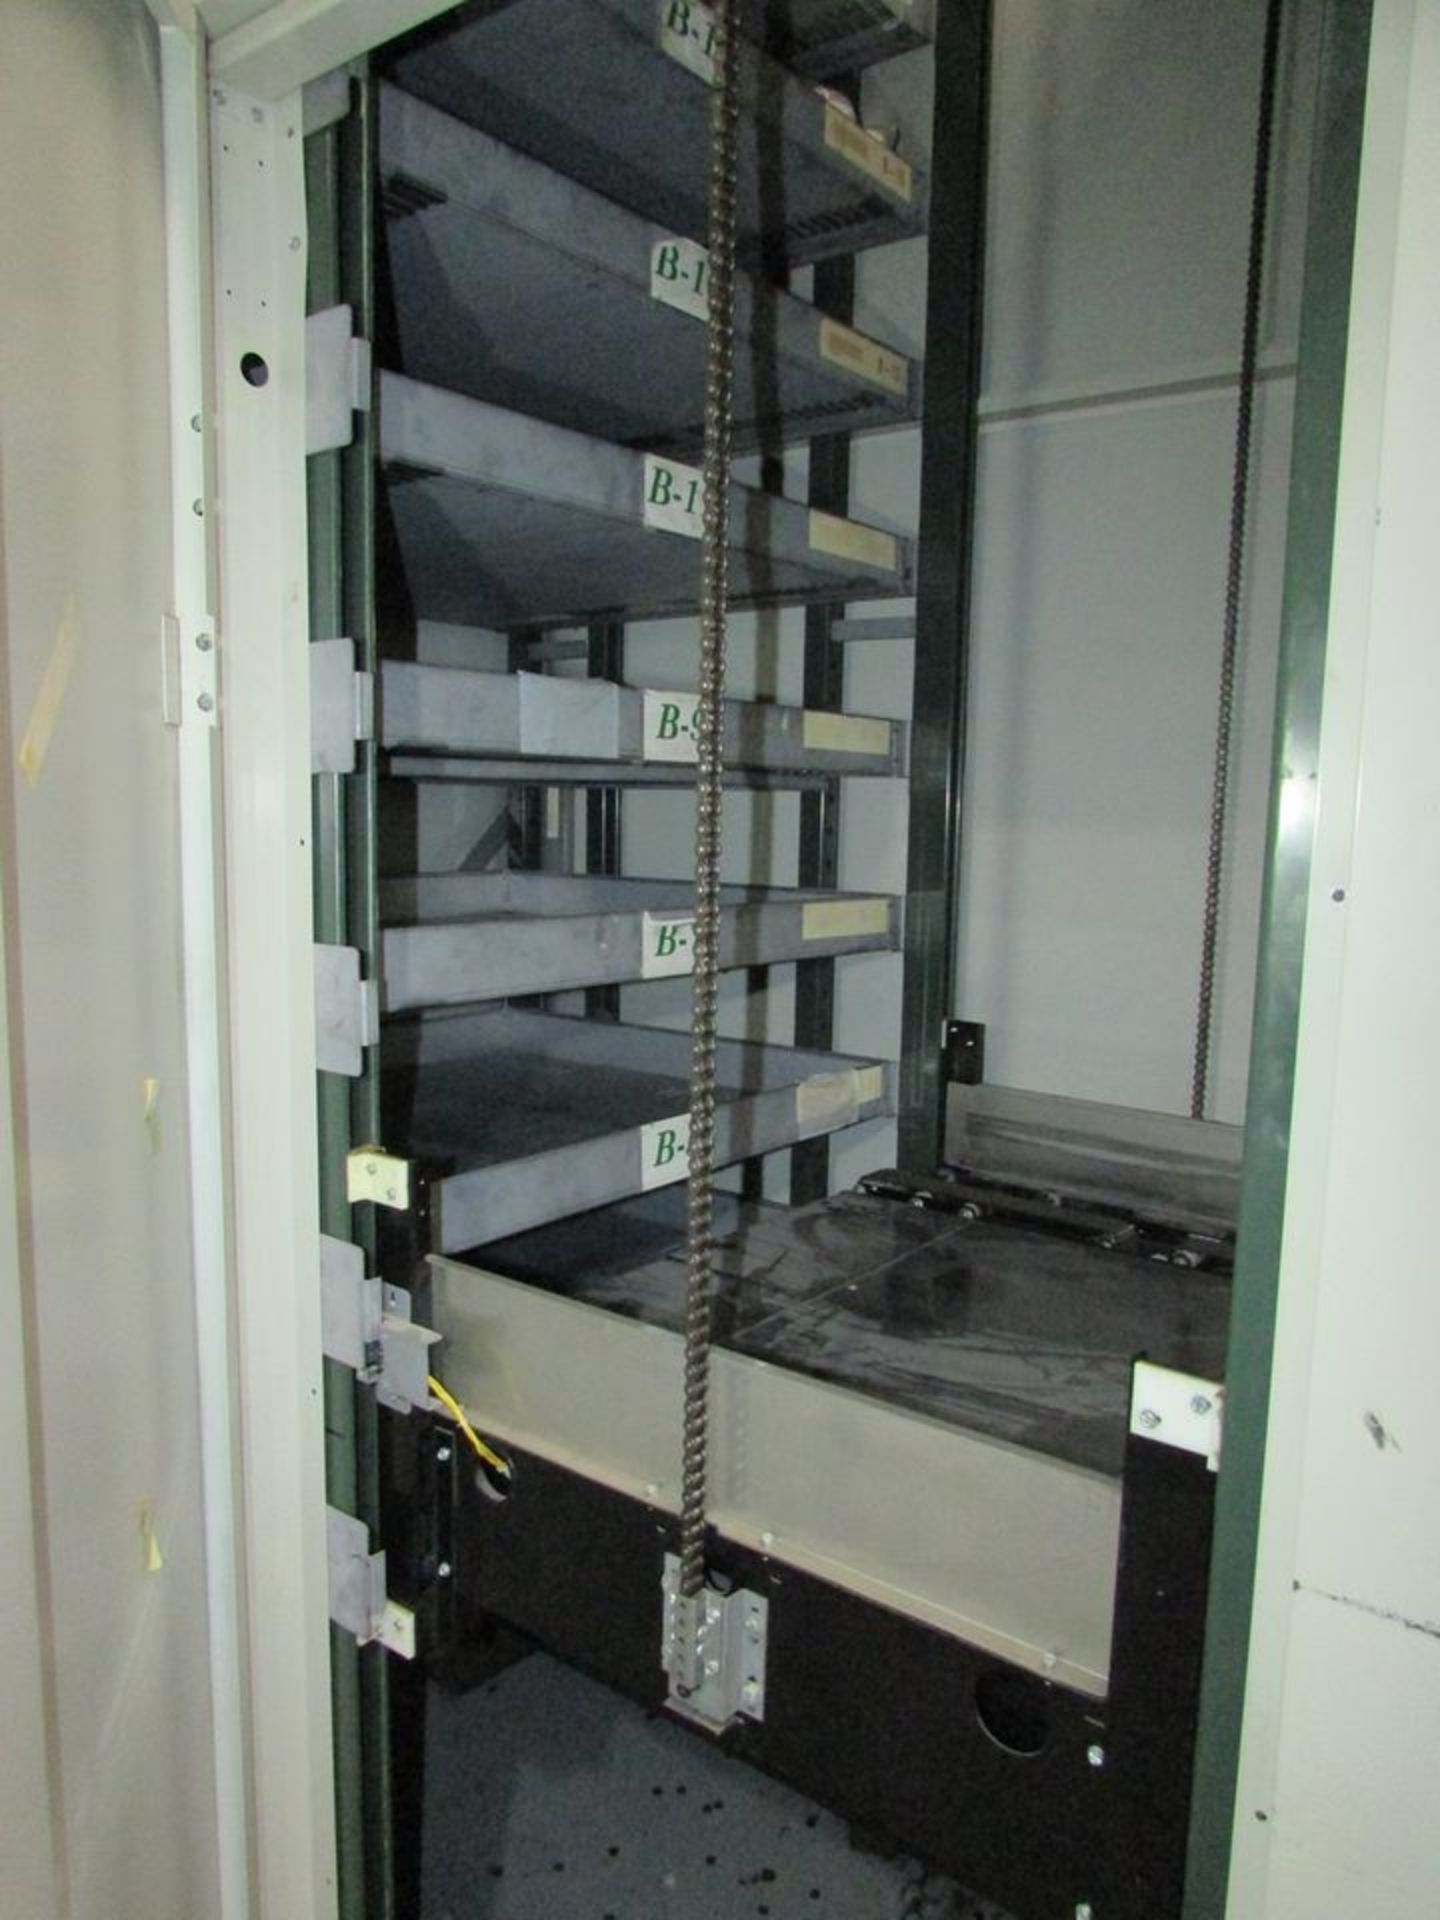 Remstar High Density Automated Storage & Retrieval System, 30" x 36" Trays, 10' High - Image 6 of 7